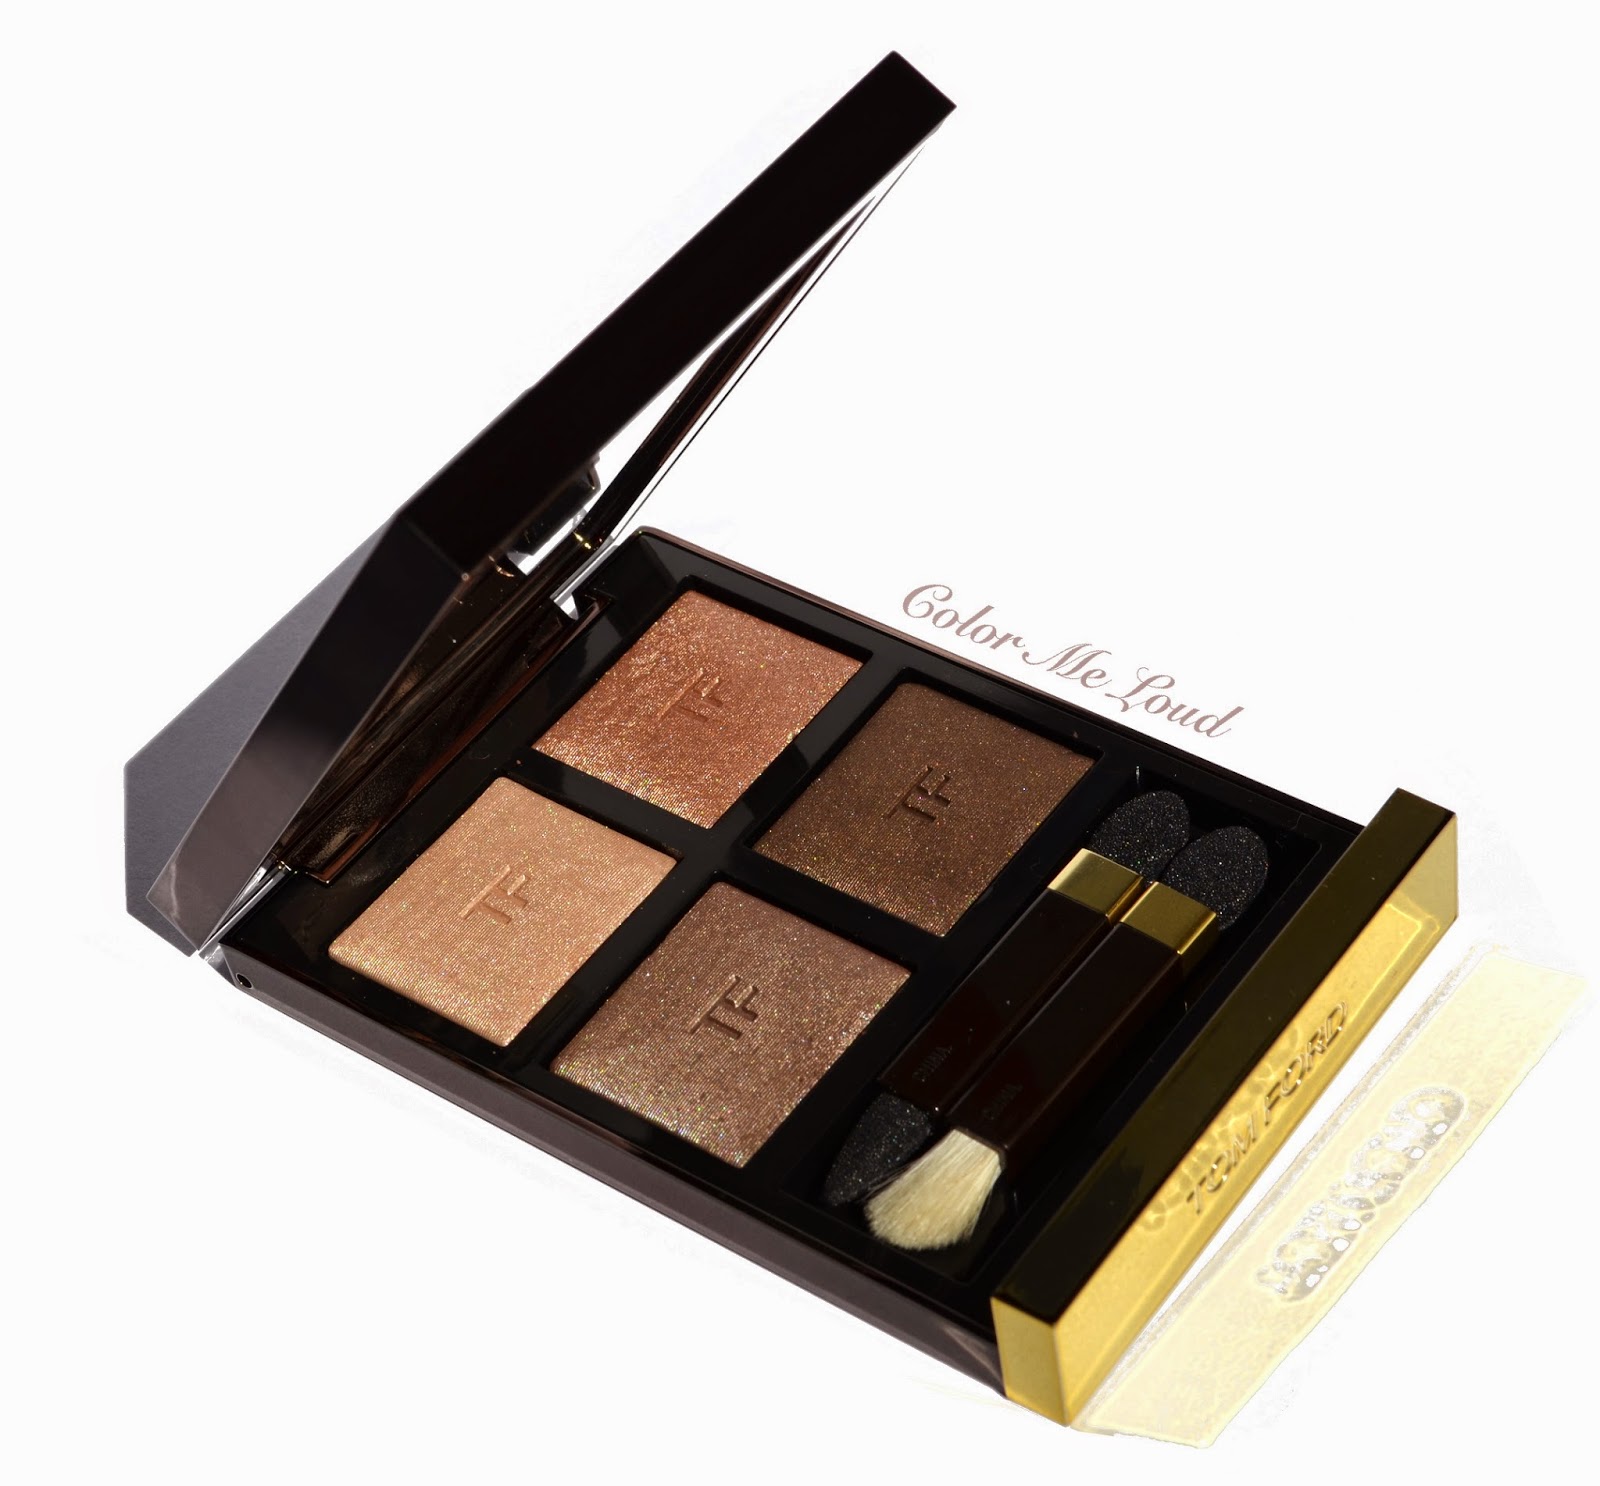 Tom Ford Eye Color Quad #03 Nude Dip for Fall 2014 Collection, Swatch, Review & FOTD